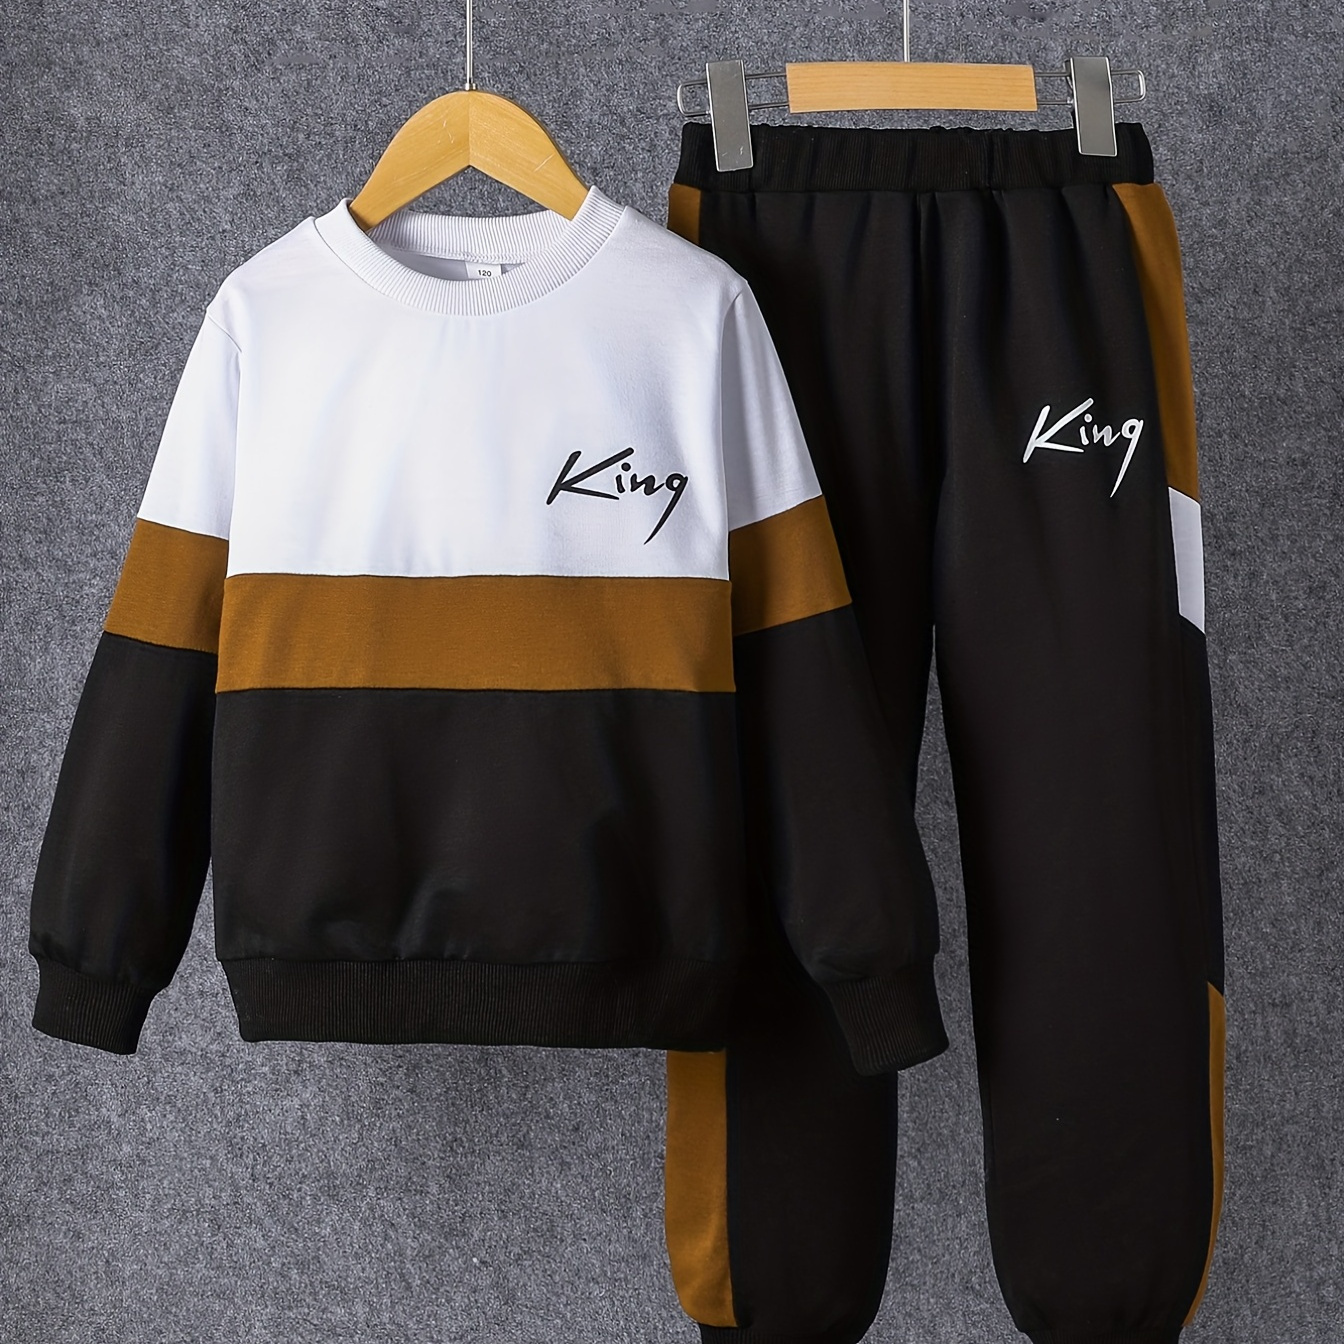 

Boy's Color Clash 2pcs, Sweatshirt & Sweatpants Set, King Print Long Sleeve Top, Casual Outfits, Kids Clothes For Spring Fall